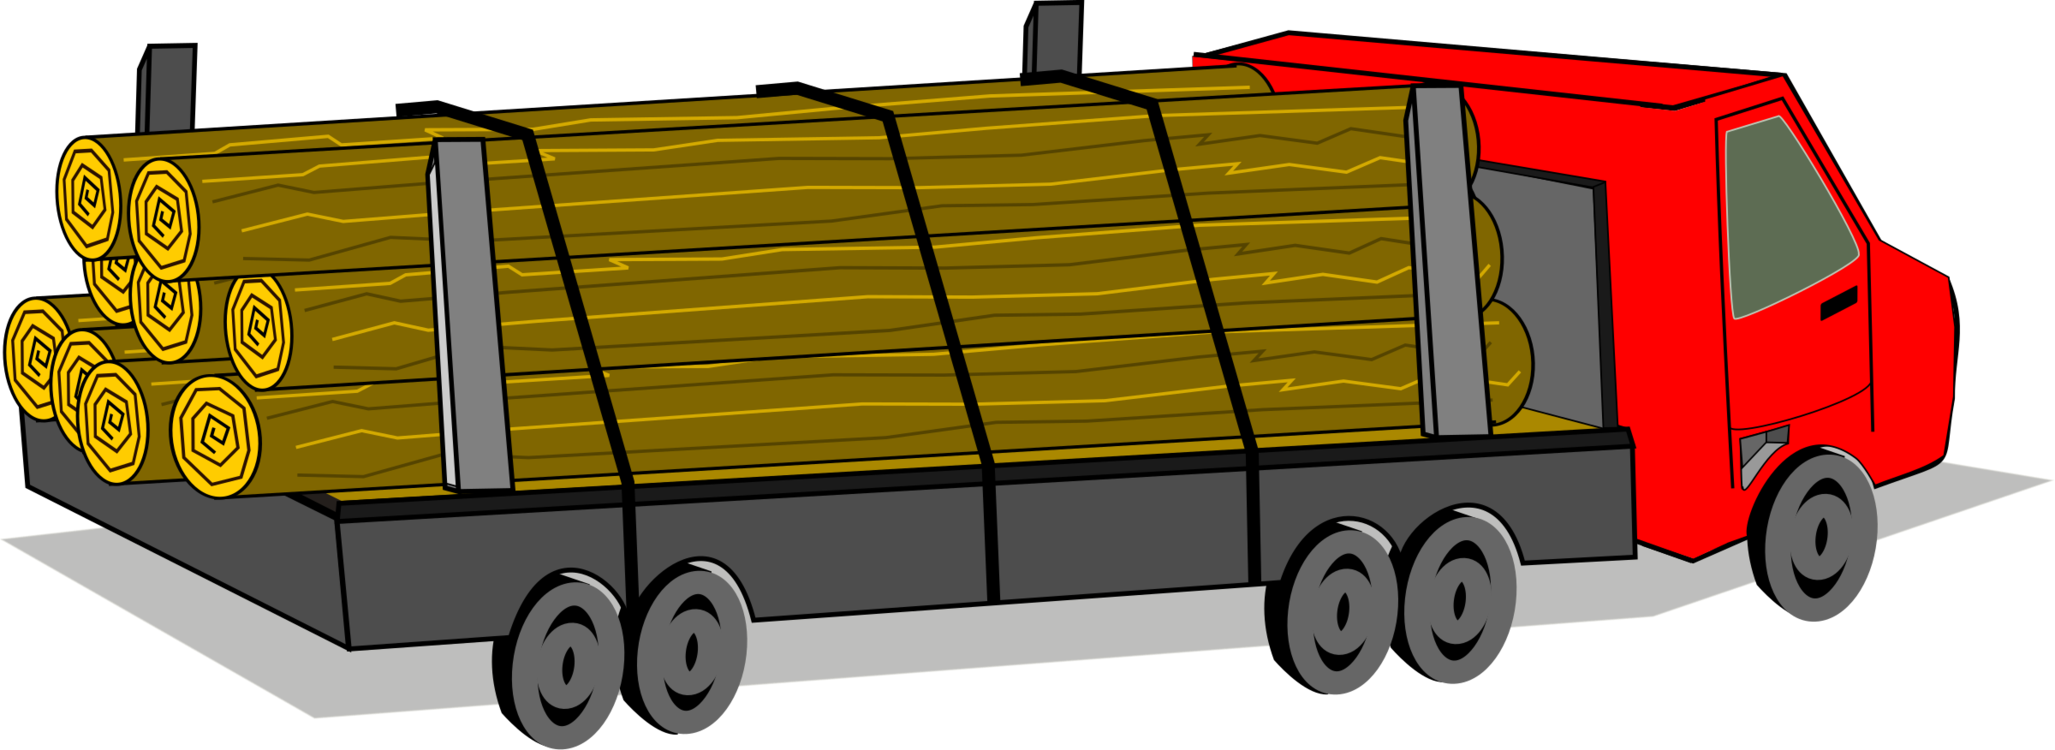 Angle,Car,Commercial Vehicle